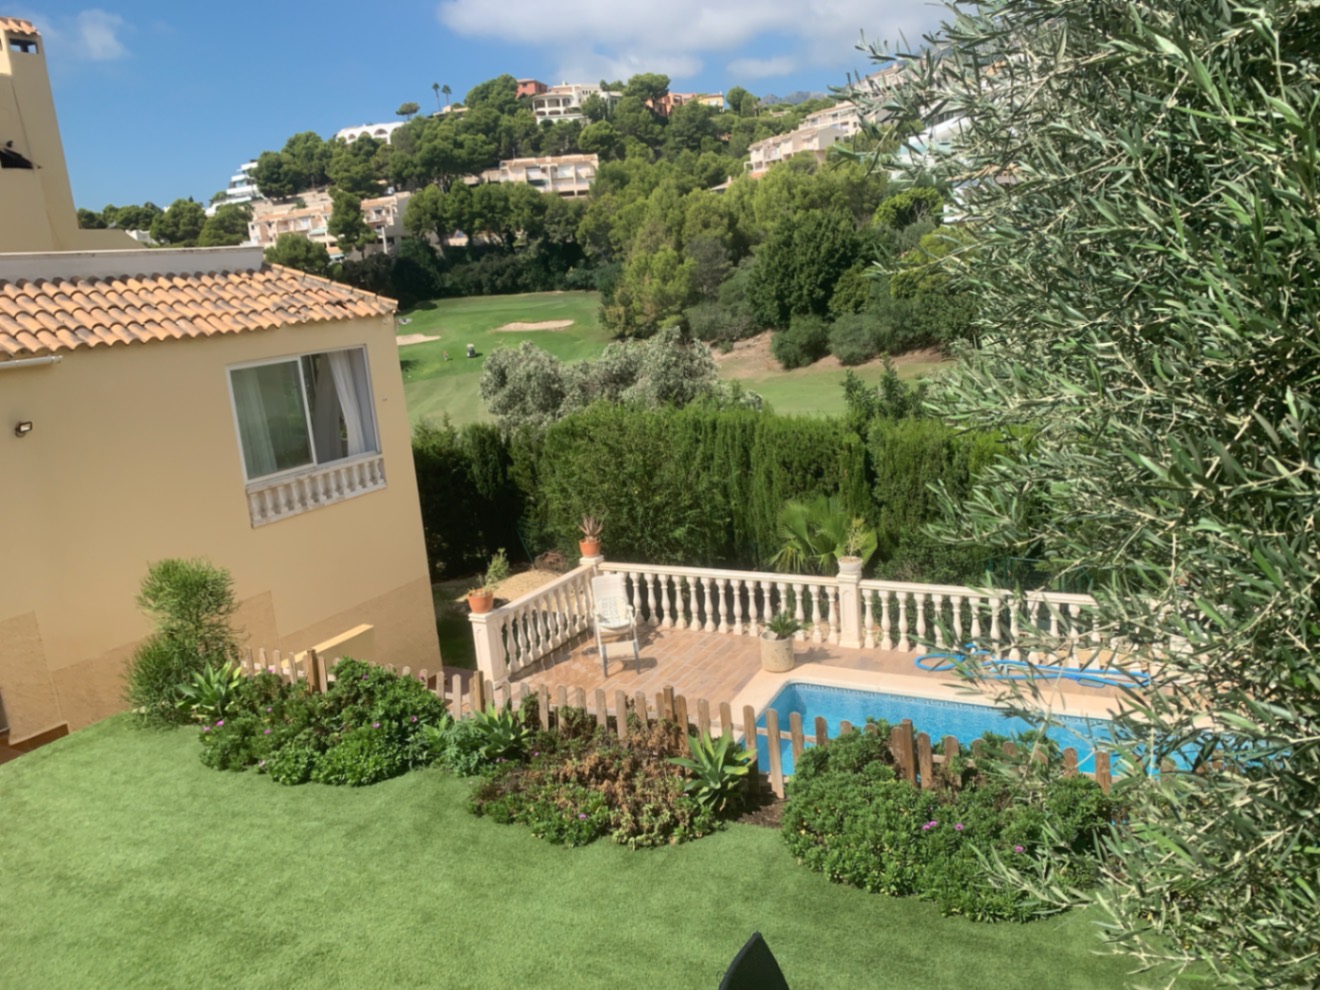 Splendid Villa on the Altea Golf Course: Luxury and Style in an Exceptional Location